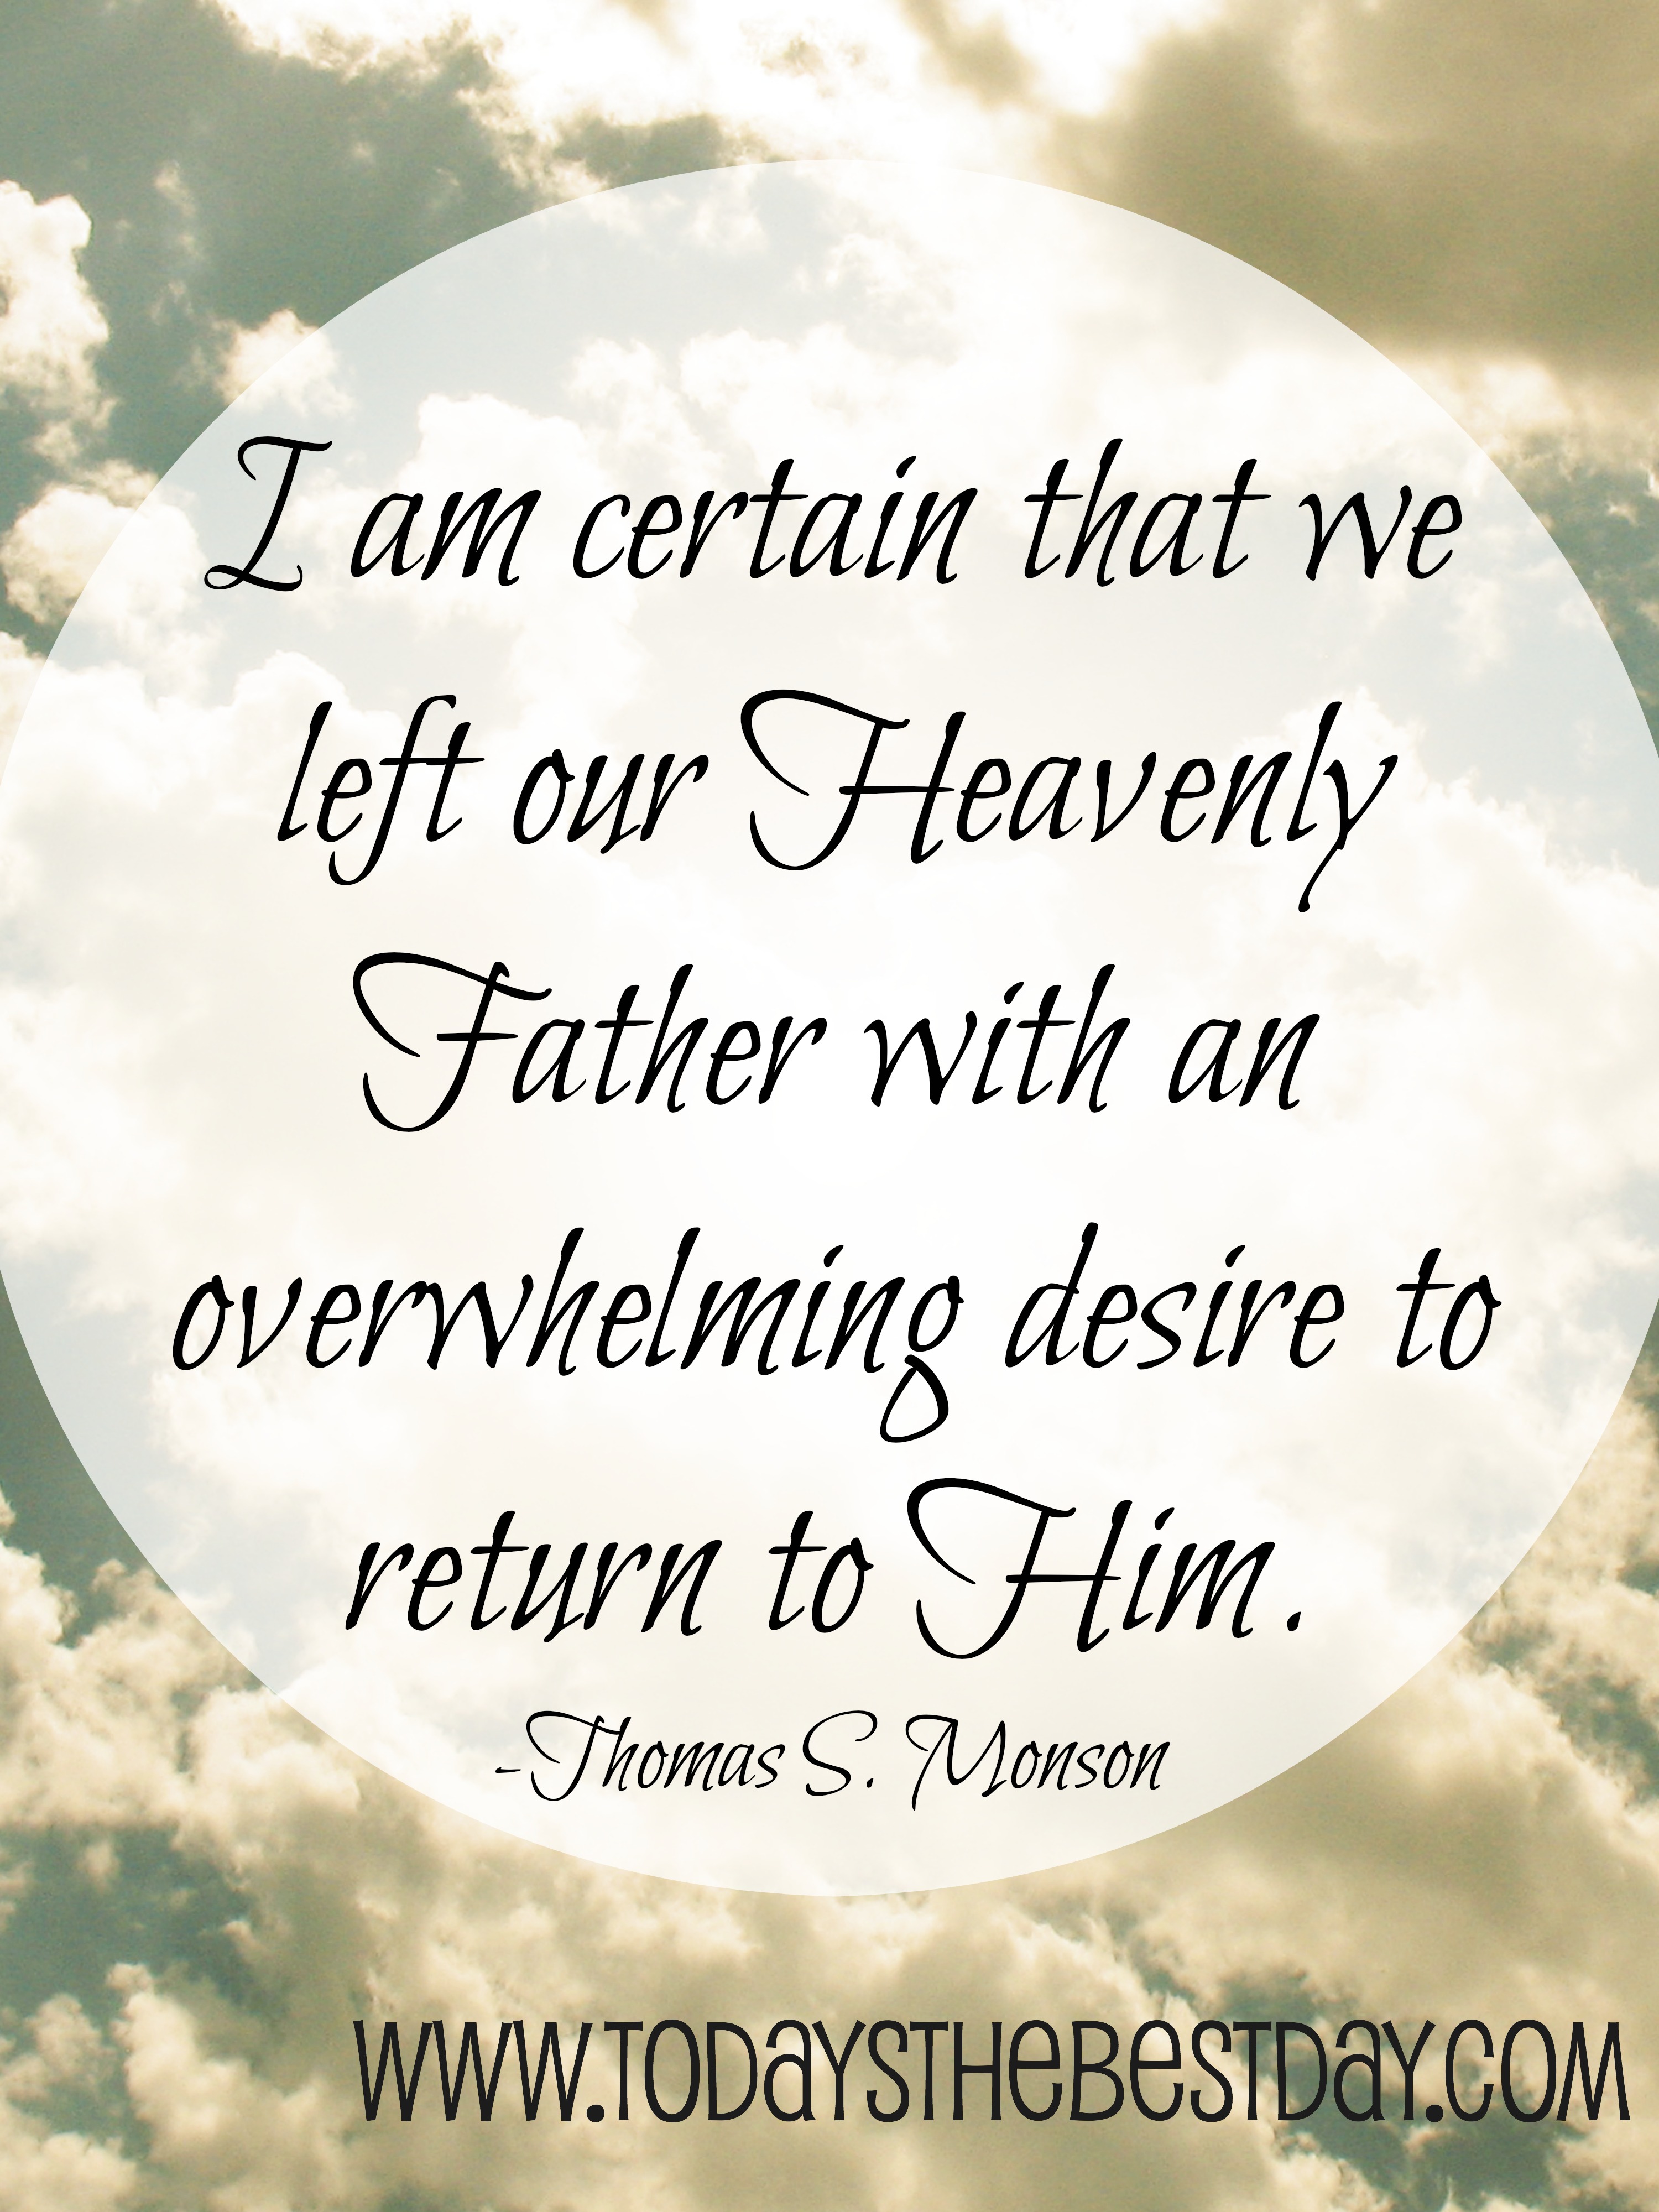 I-am-certain-that-we-left-our-Heavenly-Father-with-an-overwhelming-desire-to-return-to-Him.jpg